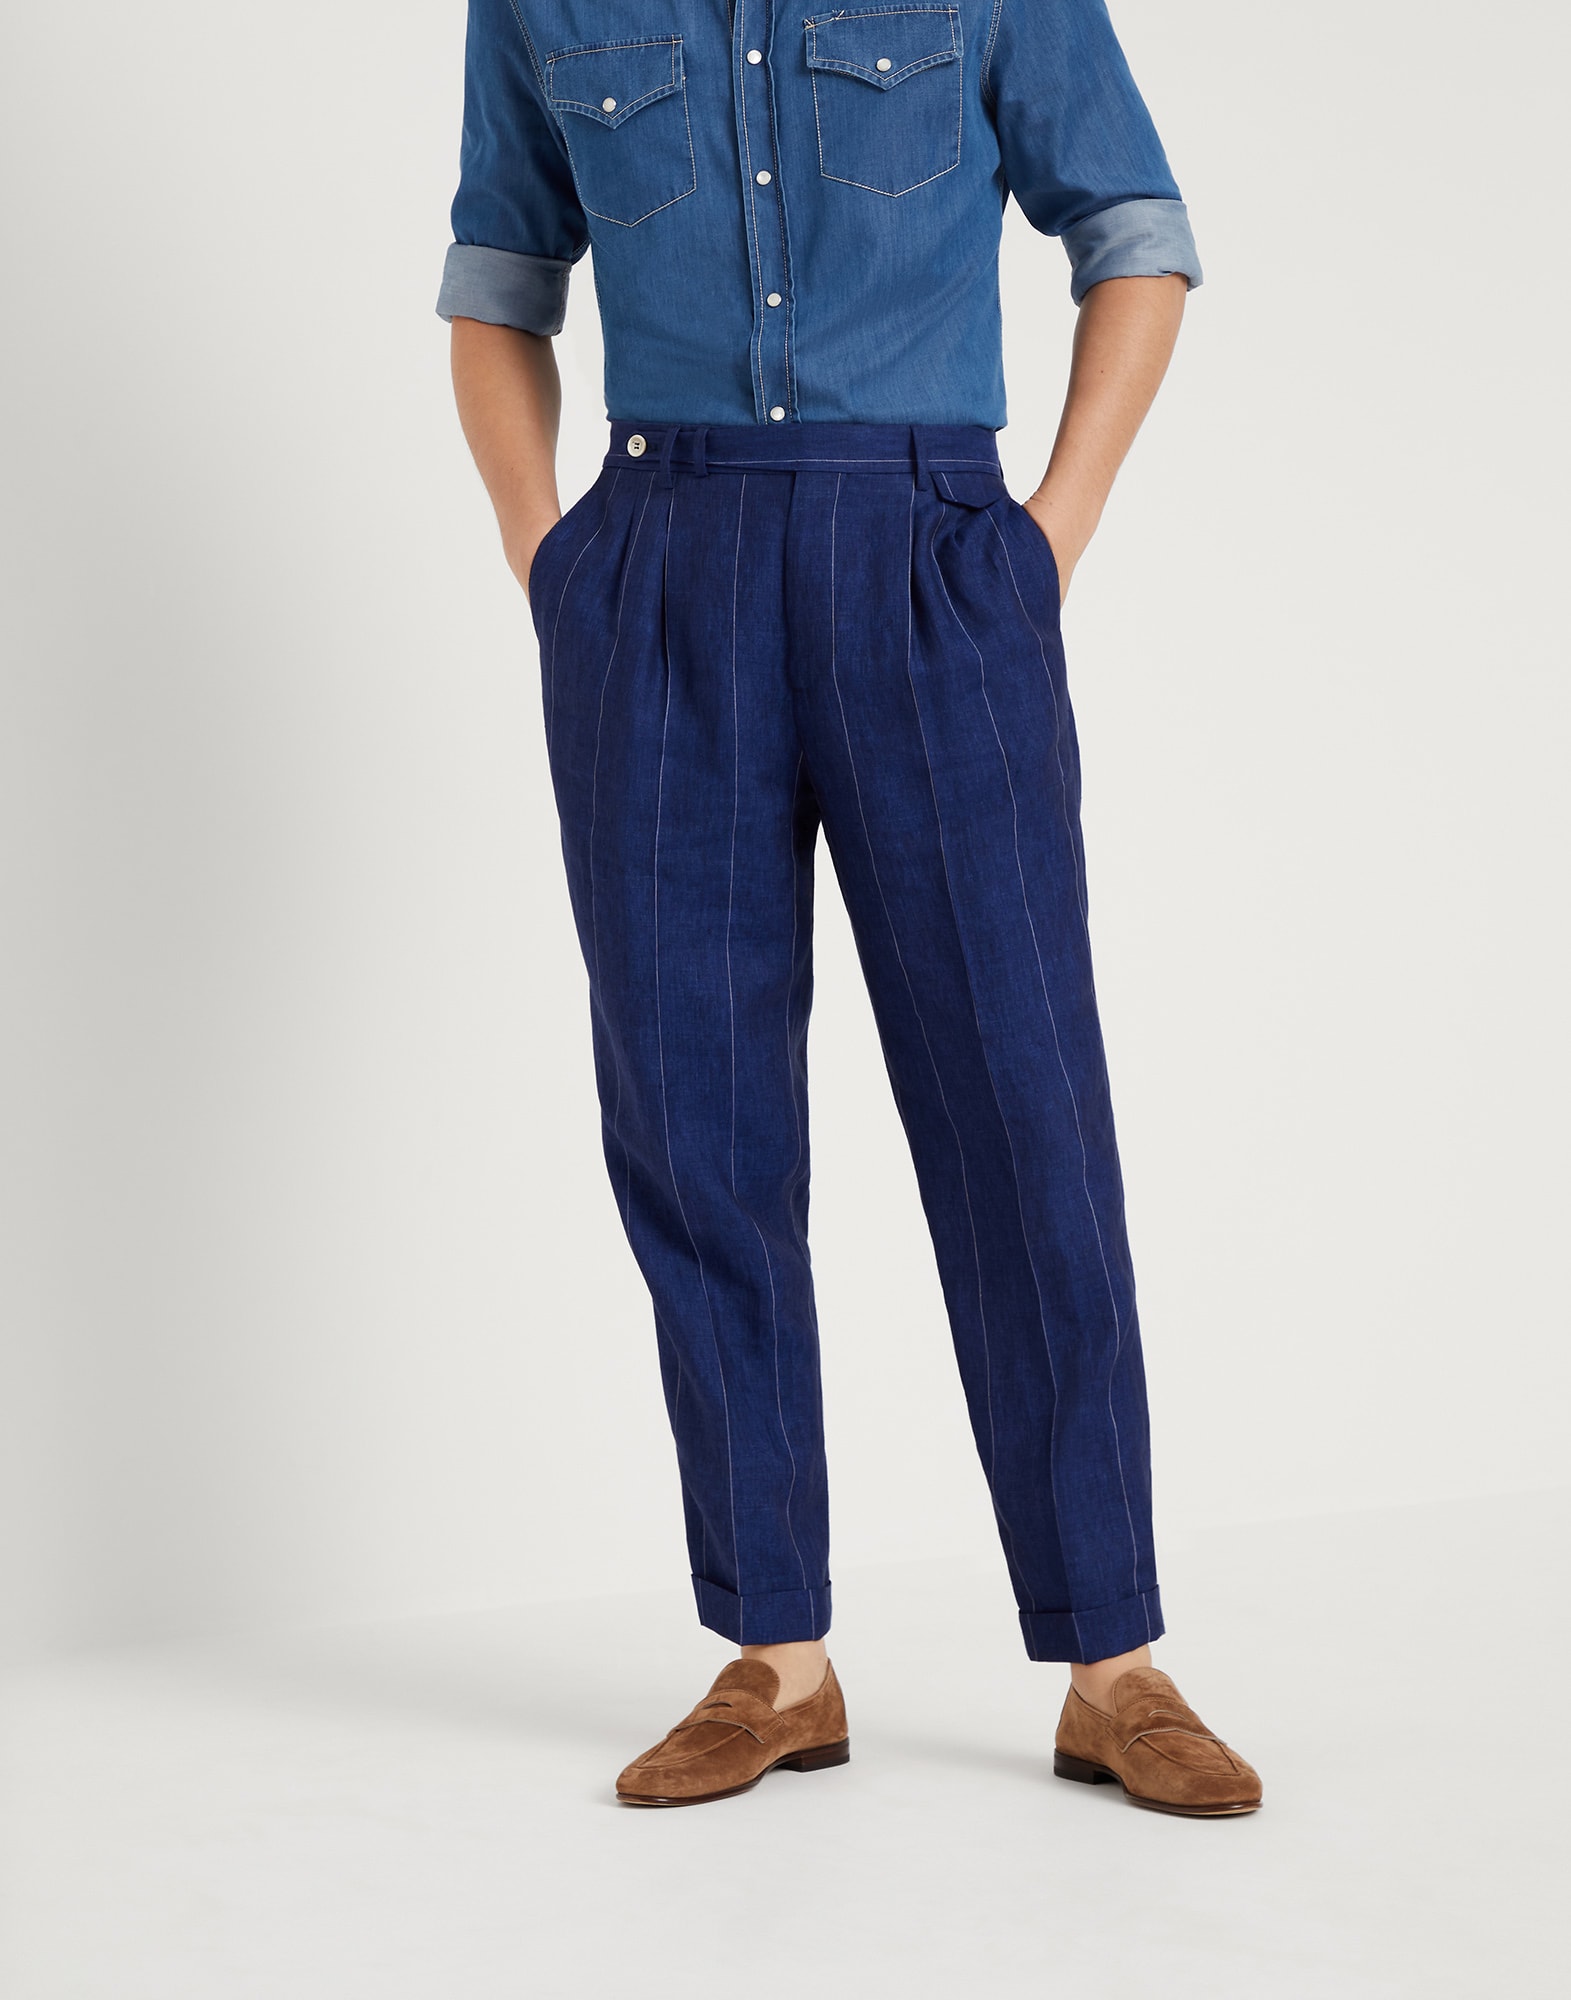 Leisure fit trousers with double pleats